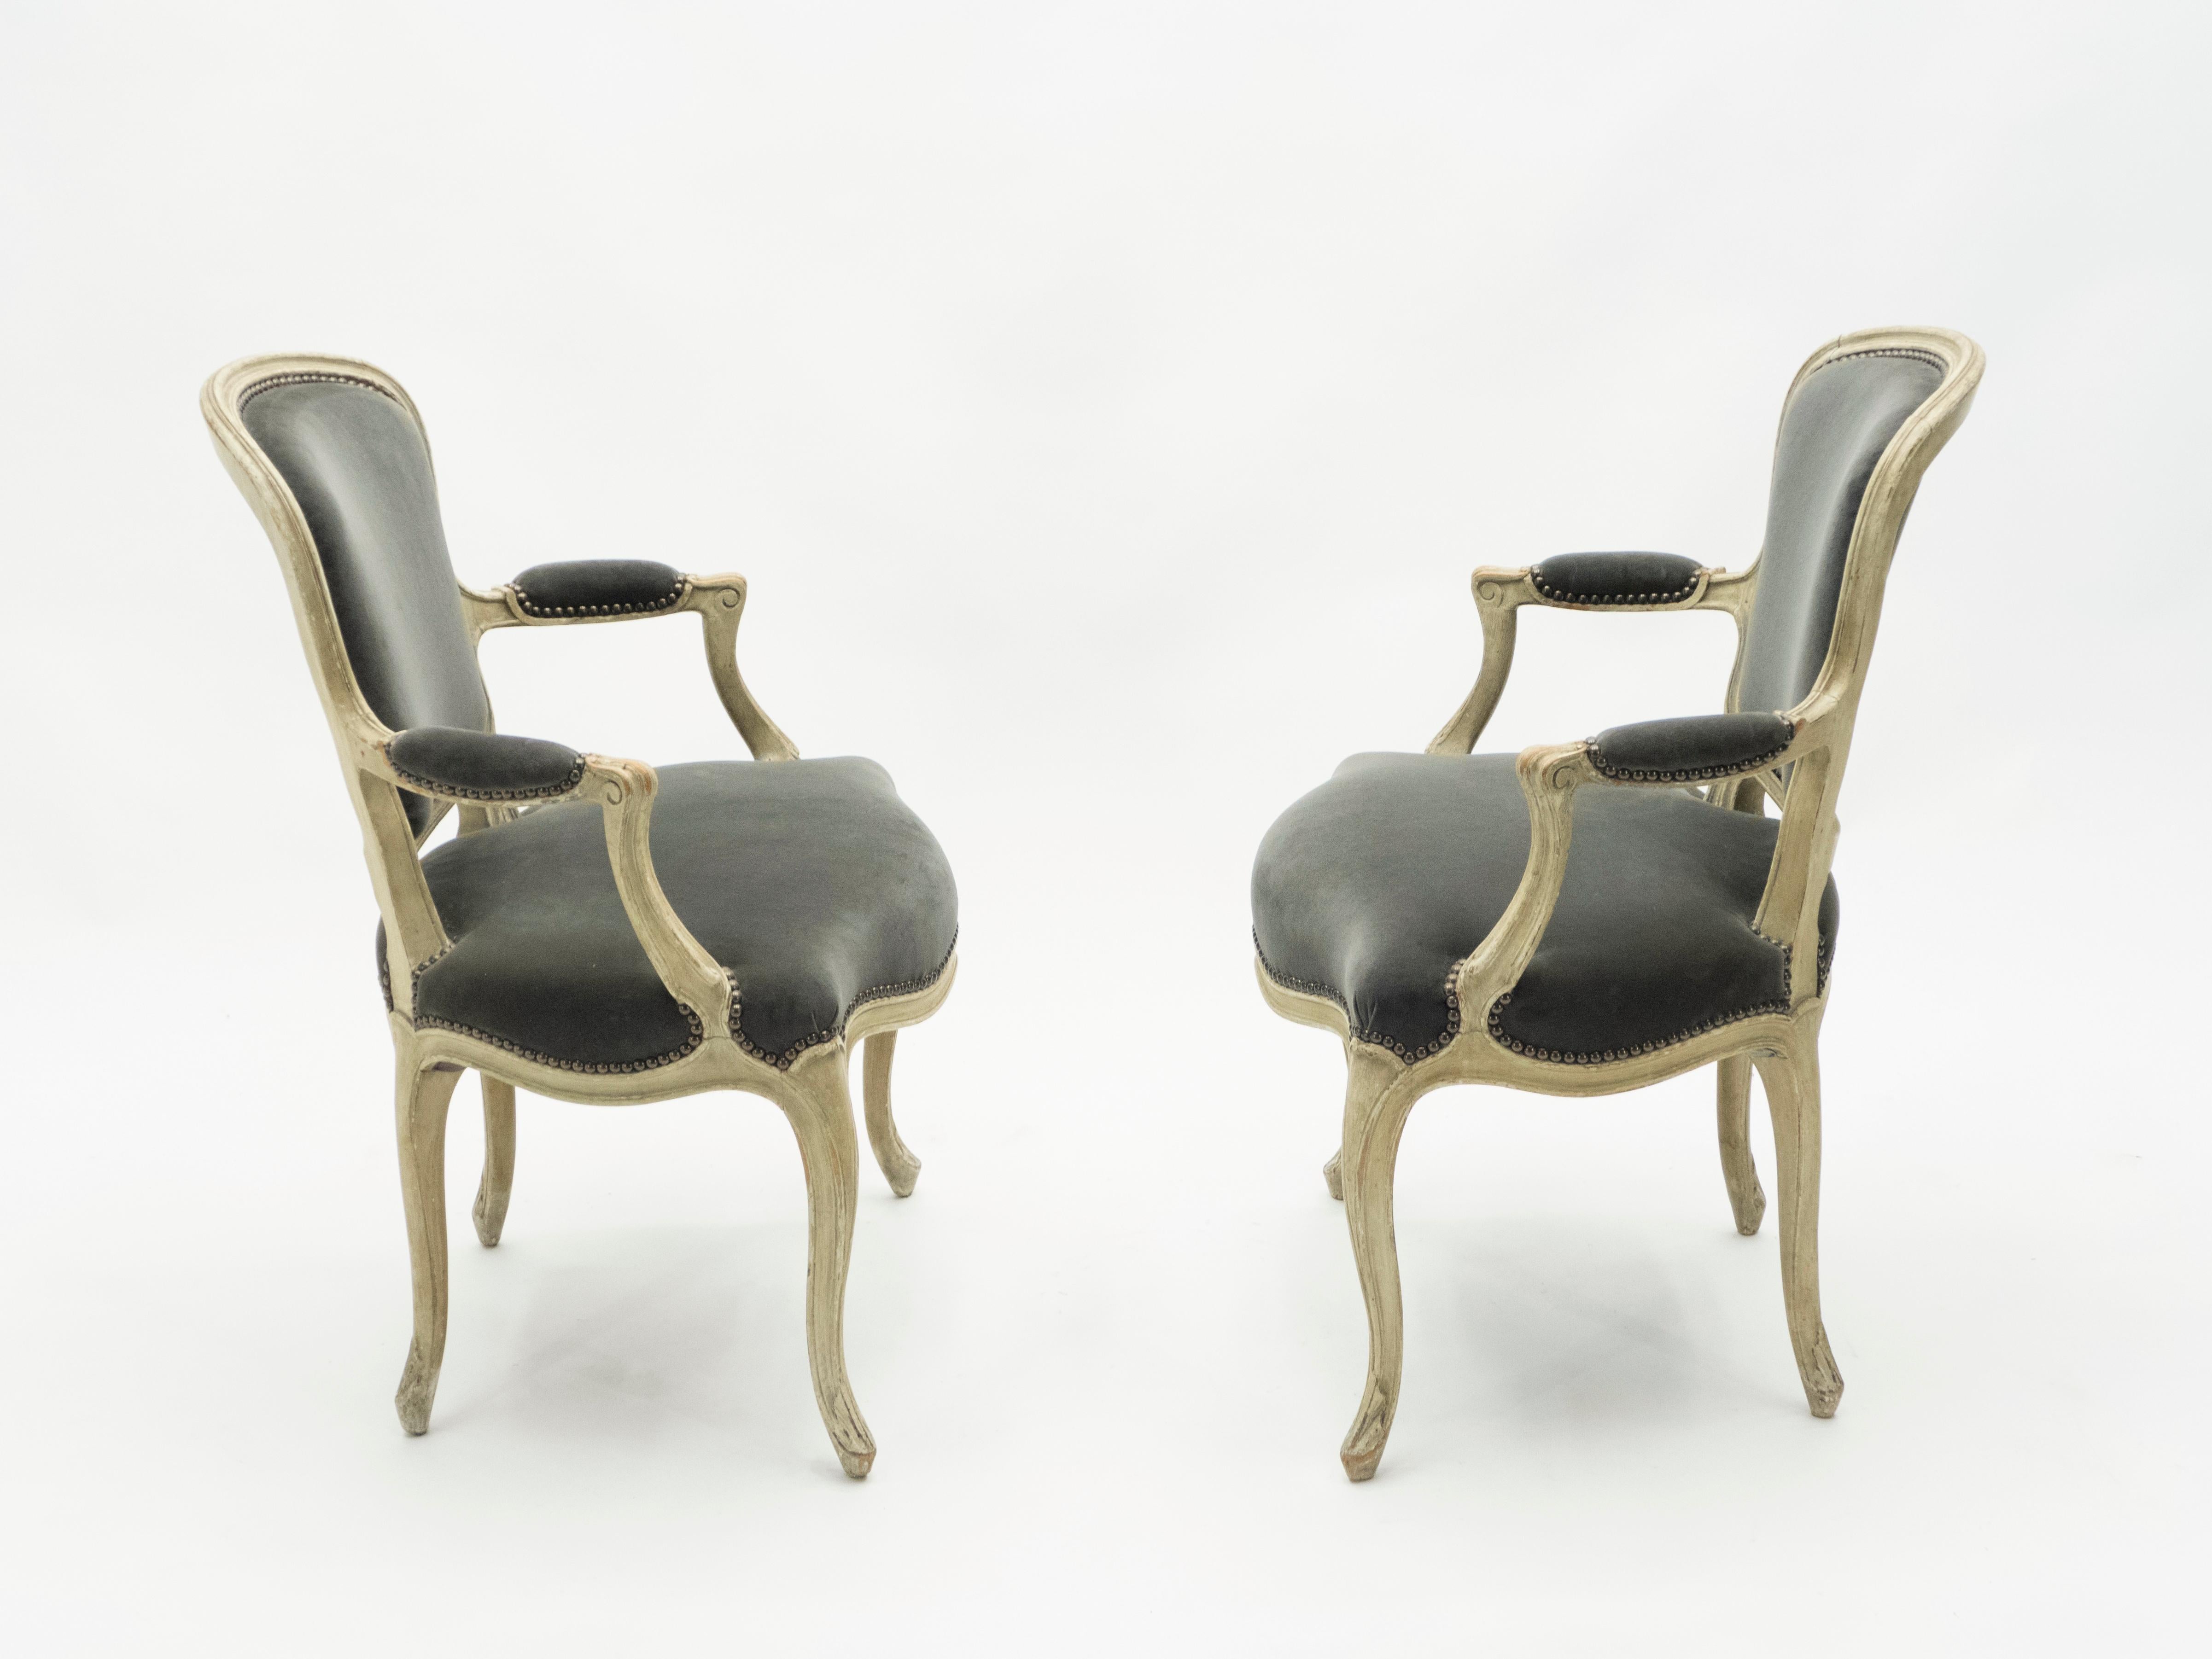 Rare Pair of Stamped Maison Jansen Louis XV Neoclassical Armchairs, 1940s For Sale 13